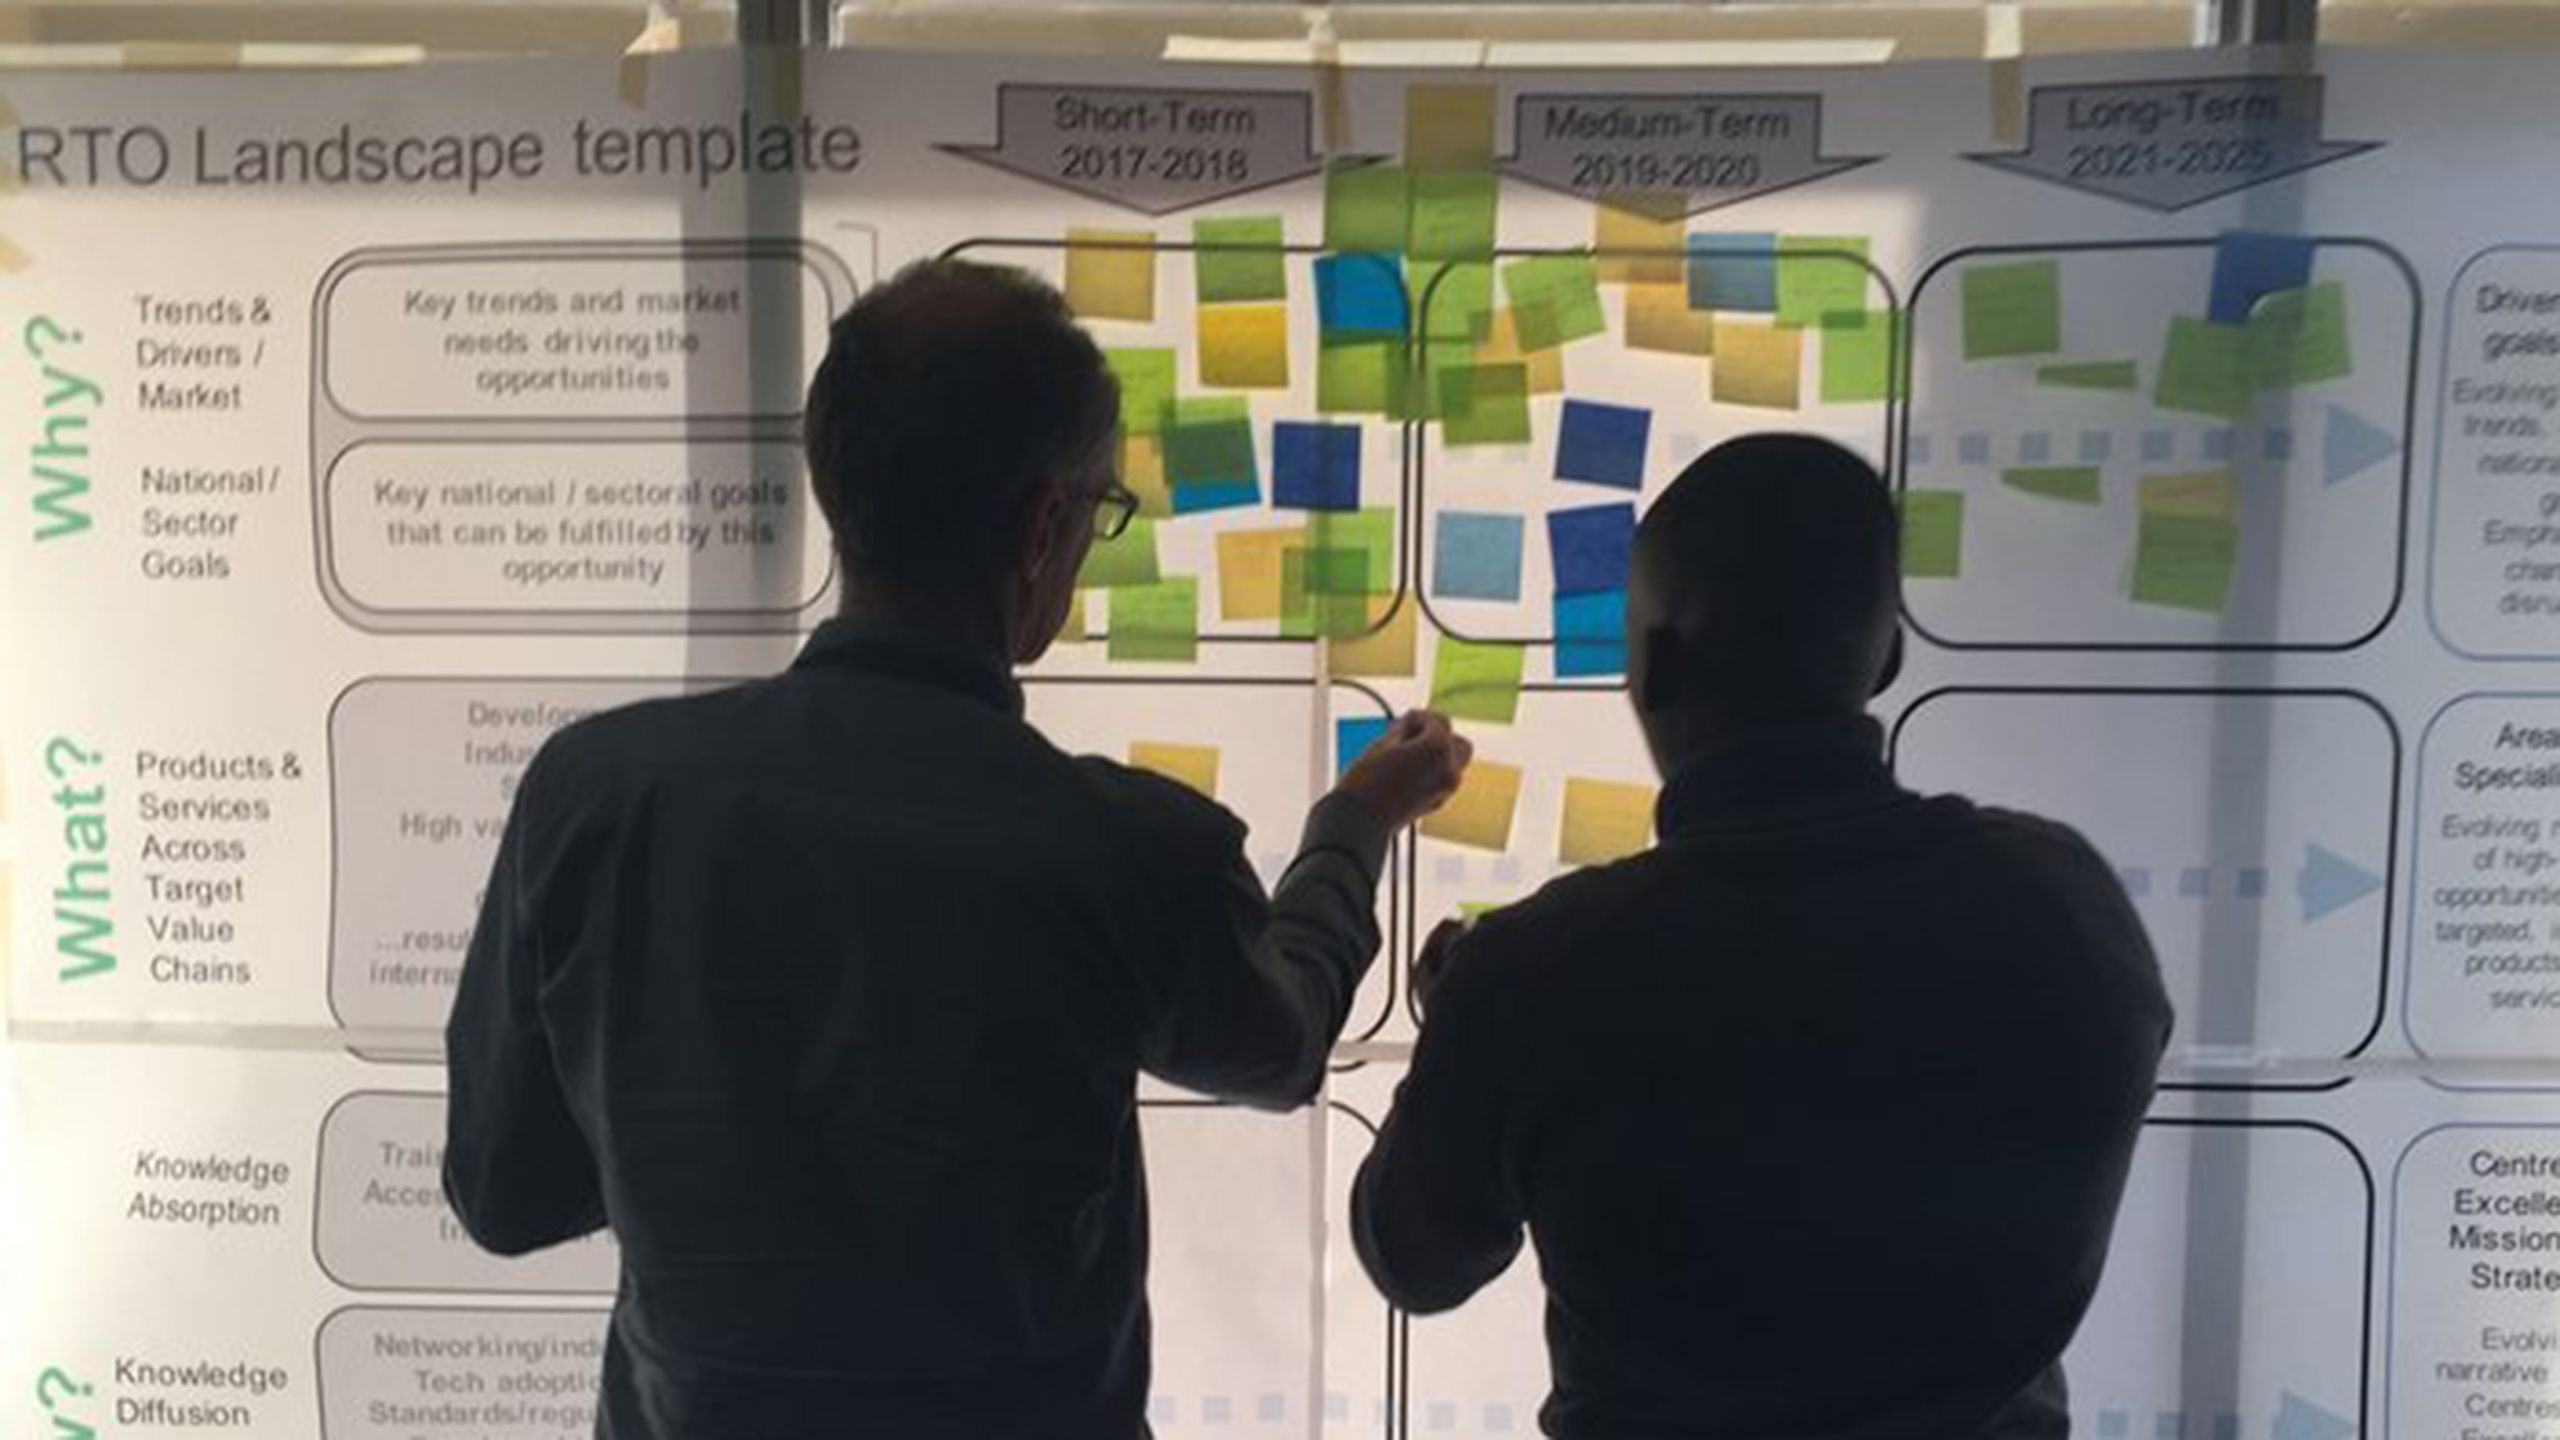 Two people roadmapping with post-it notes